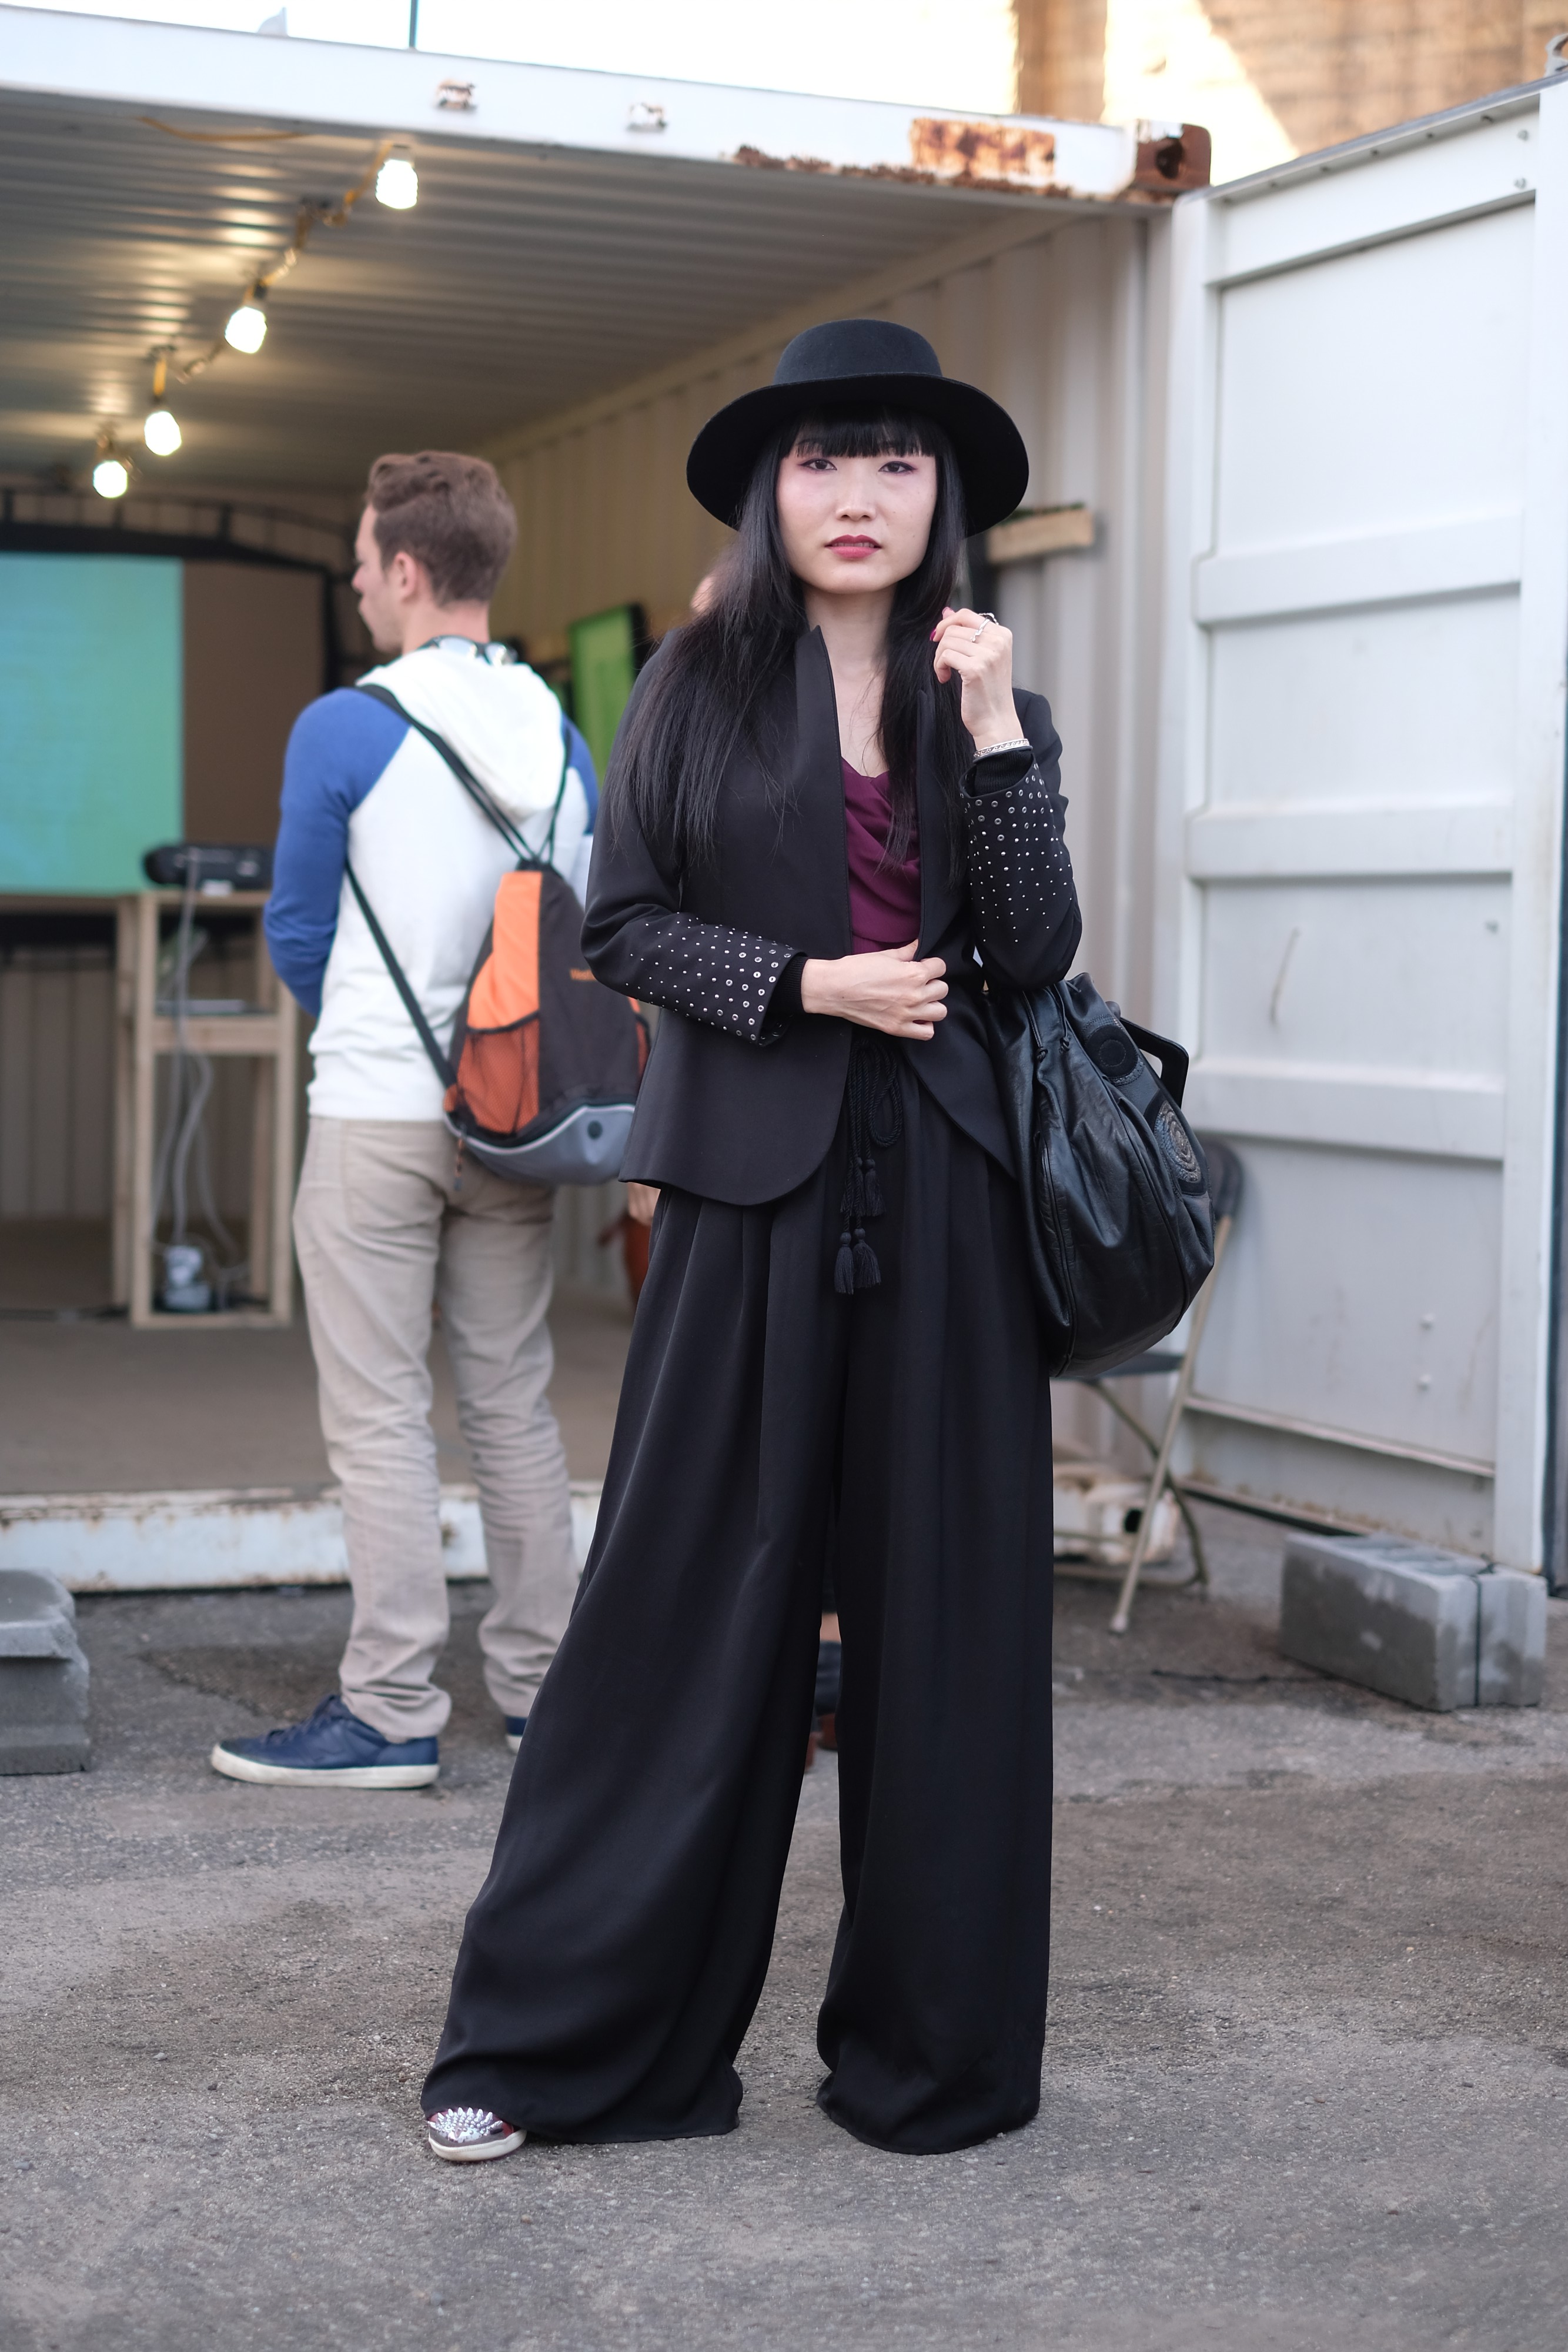 Japanese girl in black outfit